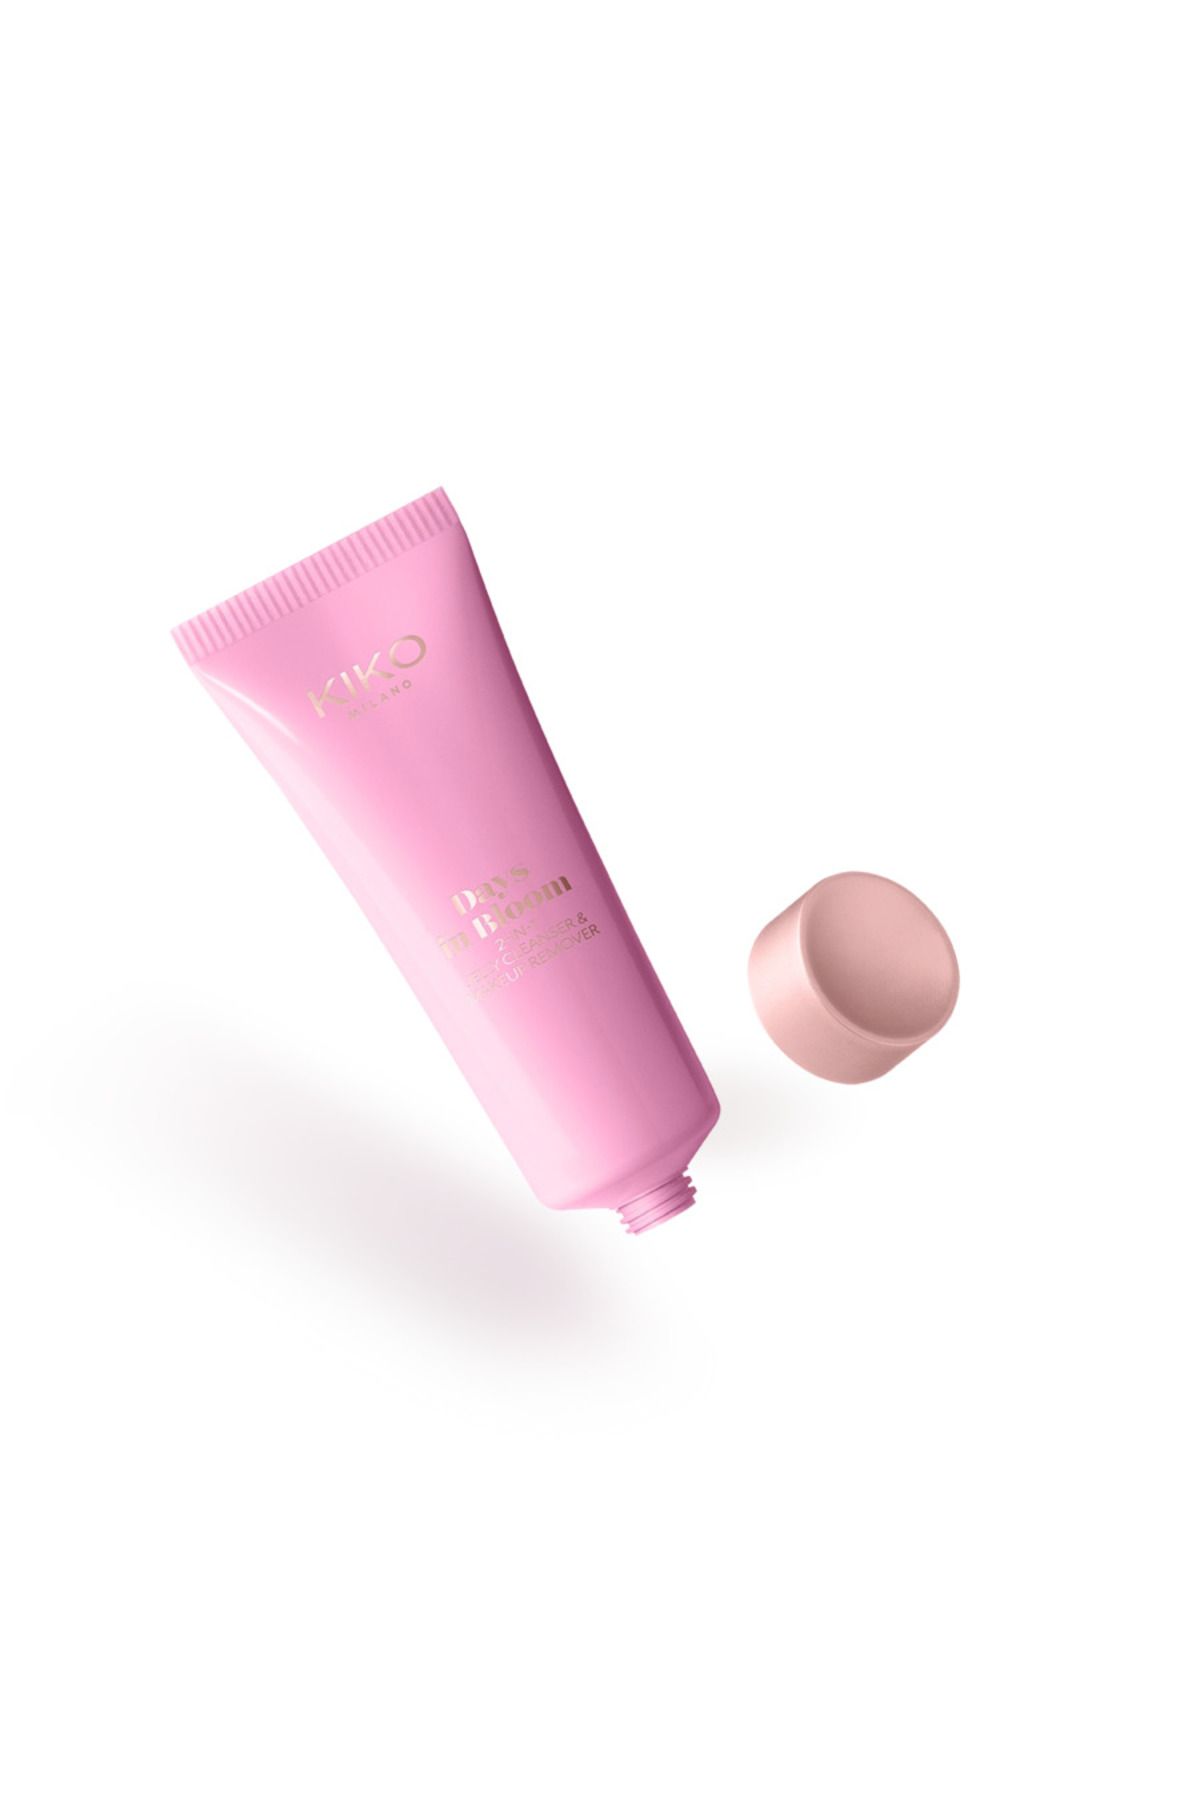 KIKO FACE CLEASING - DAYS IN BLOOM 2-IN-1 JELLY CLEANSER&MAKEUP REMOVER